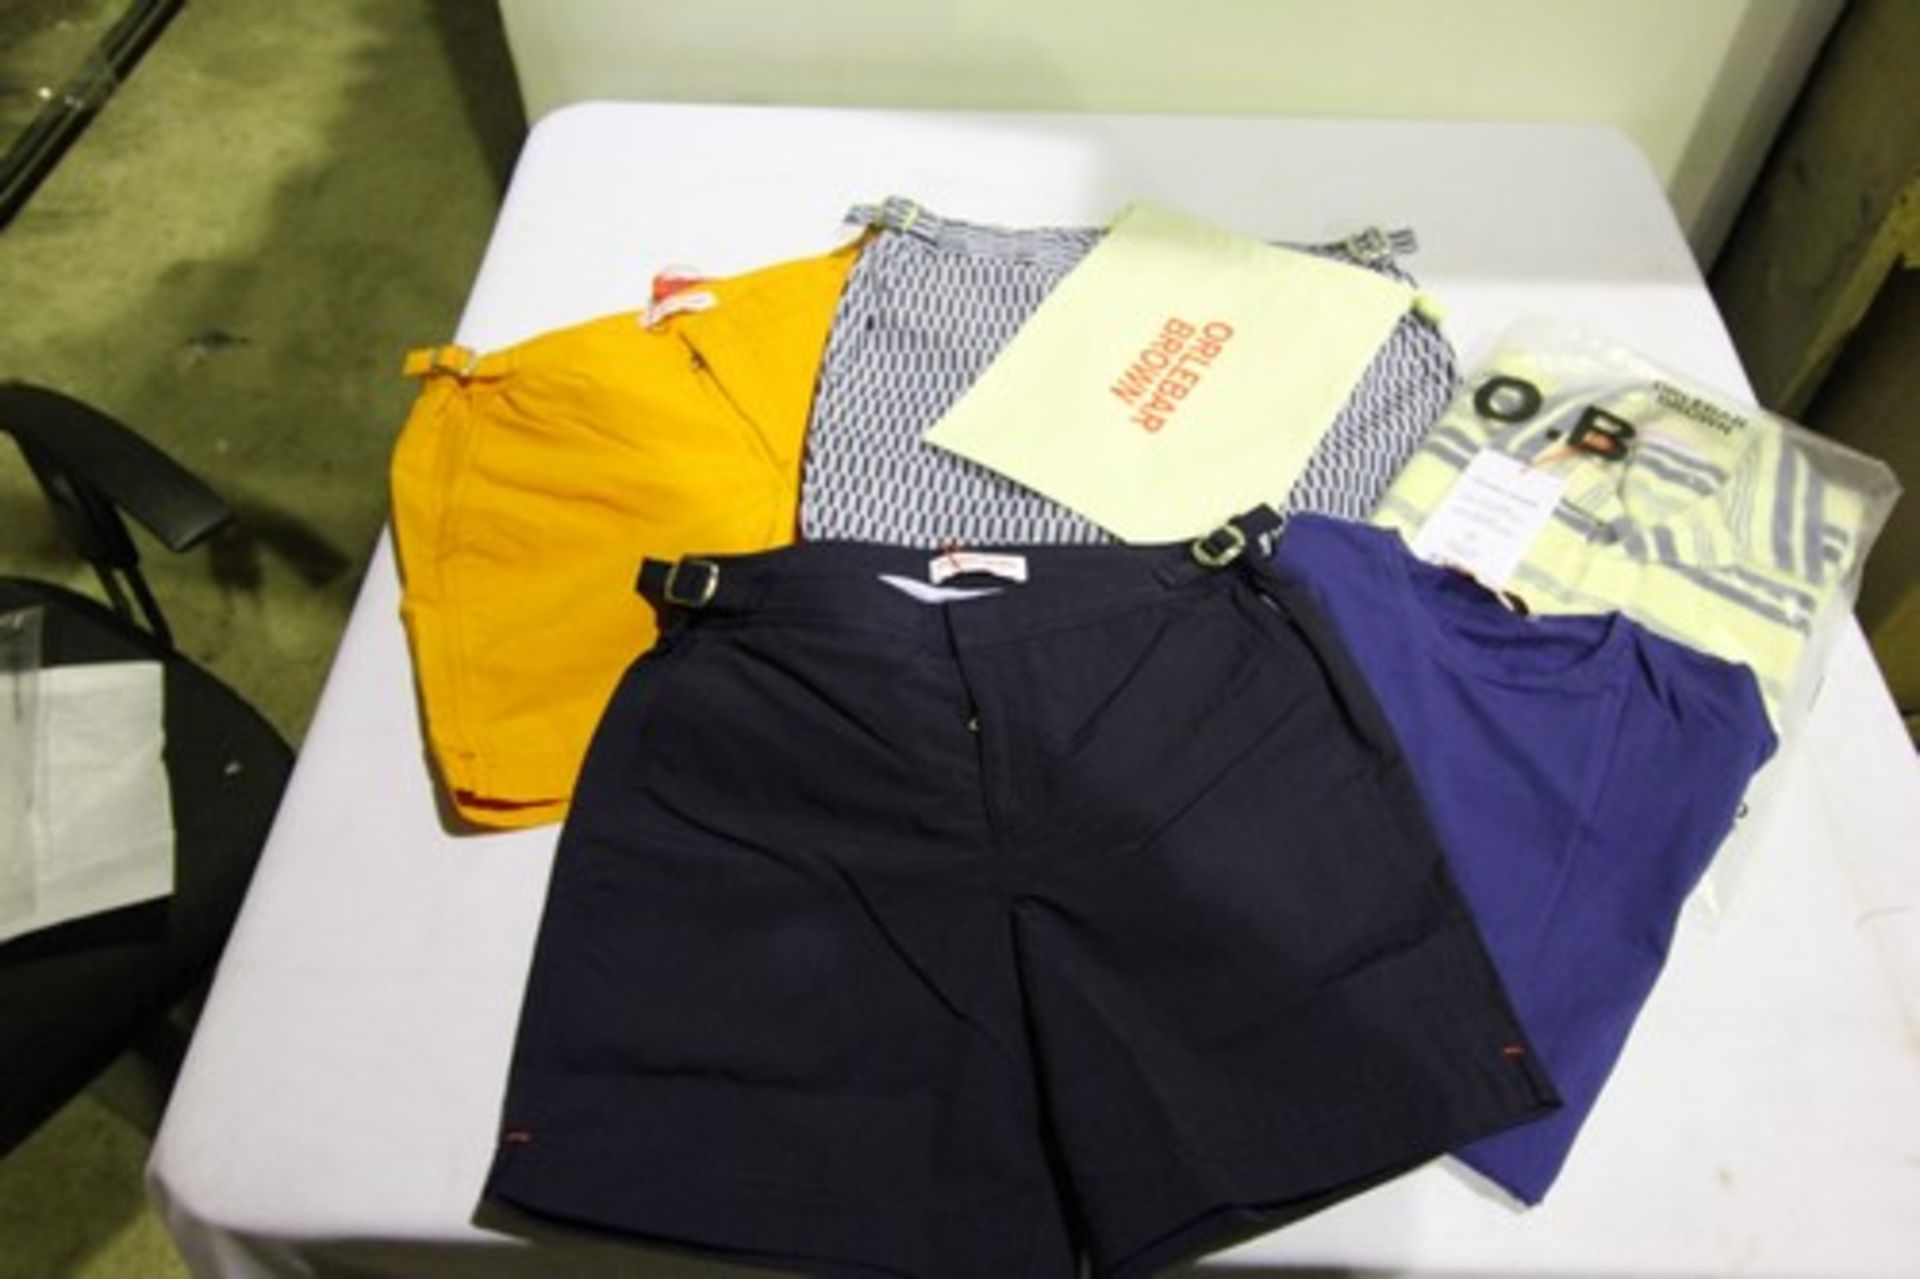 5 x items of Orlebar Brown children's wear comprising 3 x pairs of shorts and 2 x tops, all for